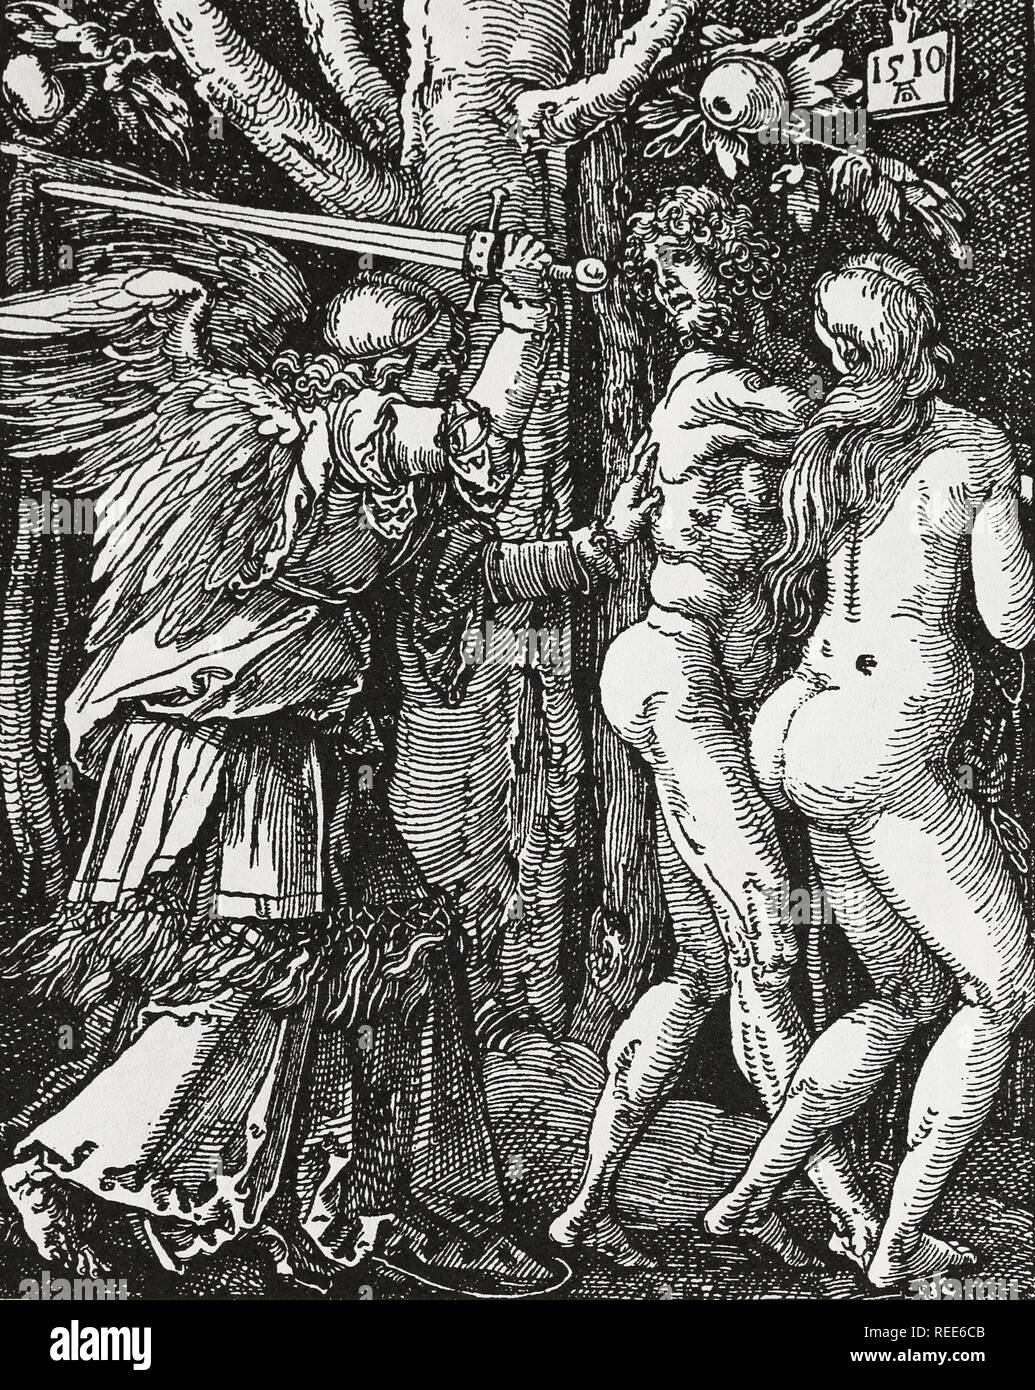 Adam and Eve expelled from Eden, 1510. By Albrecht Durer, Sheet 1, the series 'The Small Passion'. Stock Photo